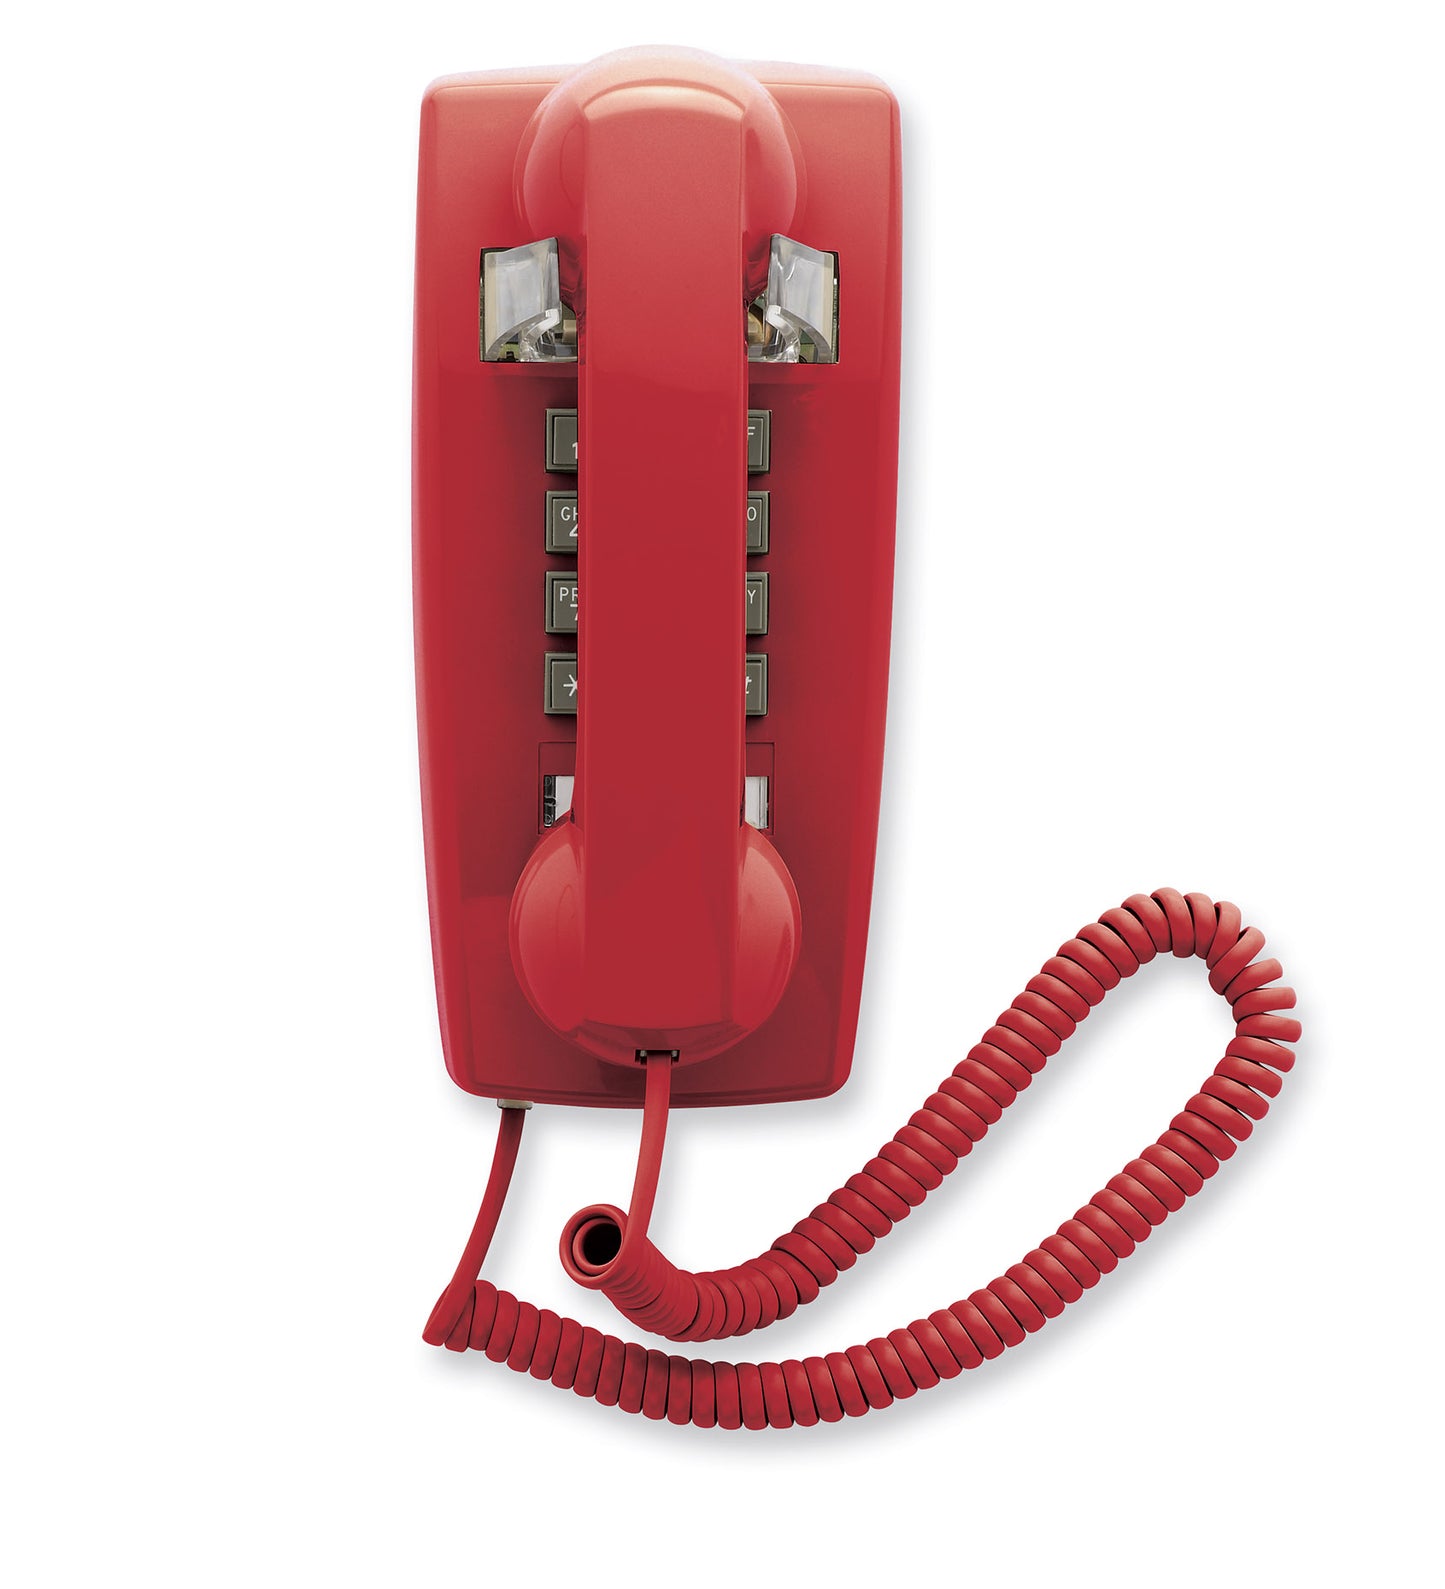 Cetis 25403 Scitec 2554E Wall Telephone - Red